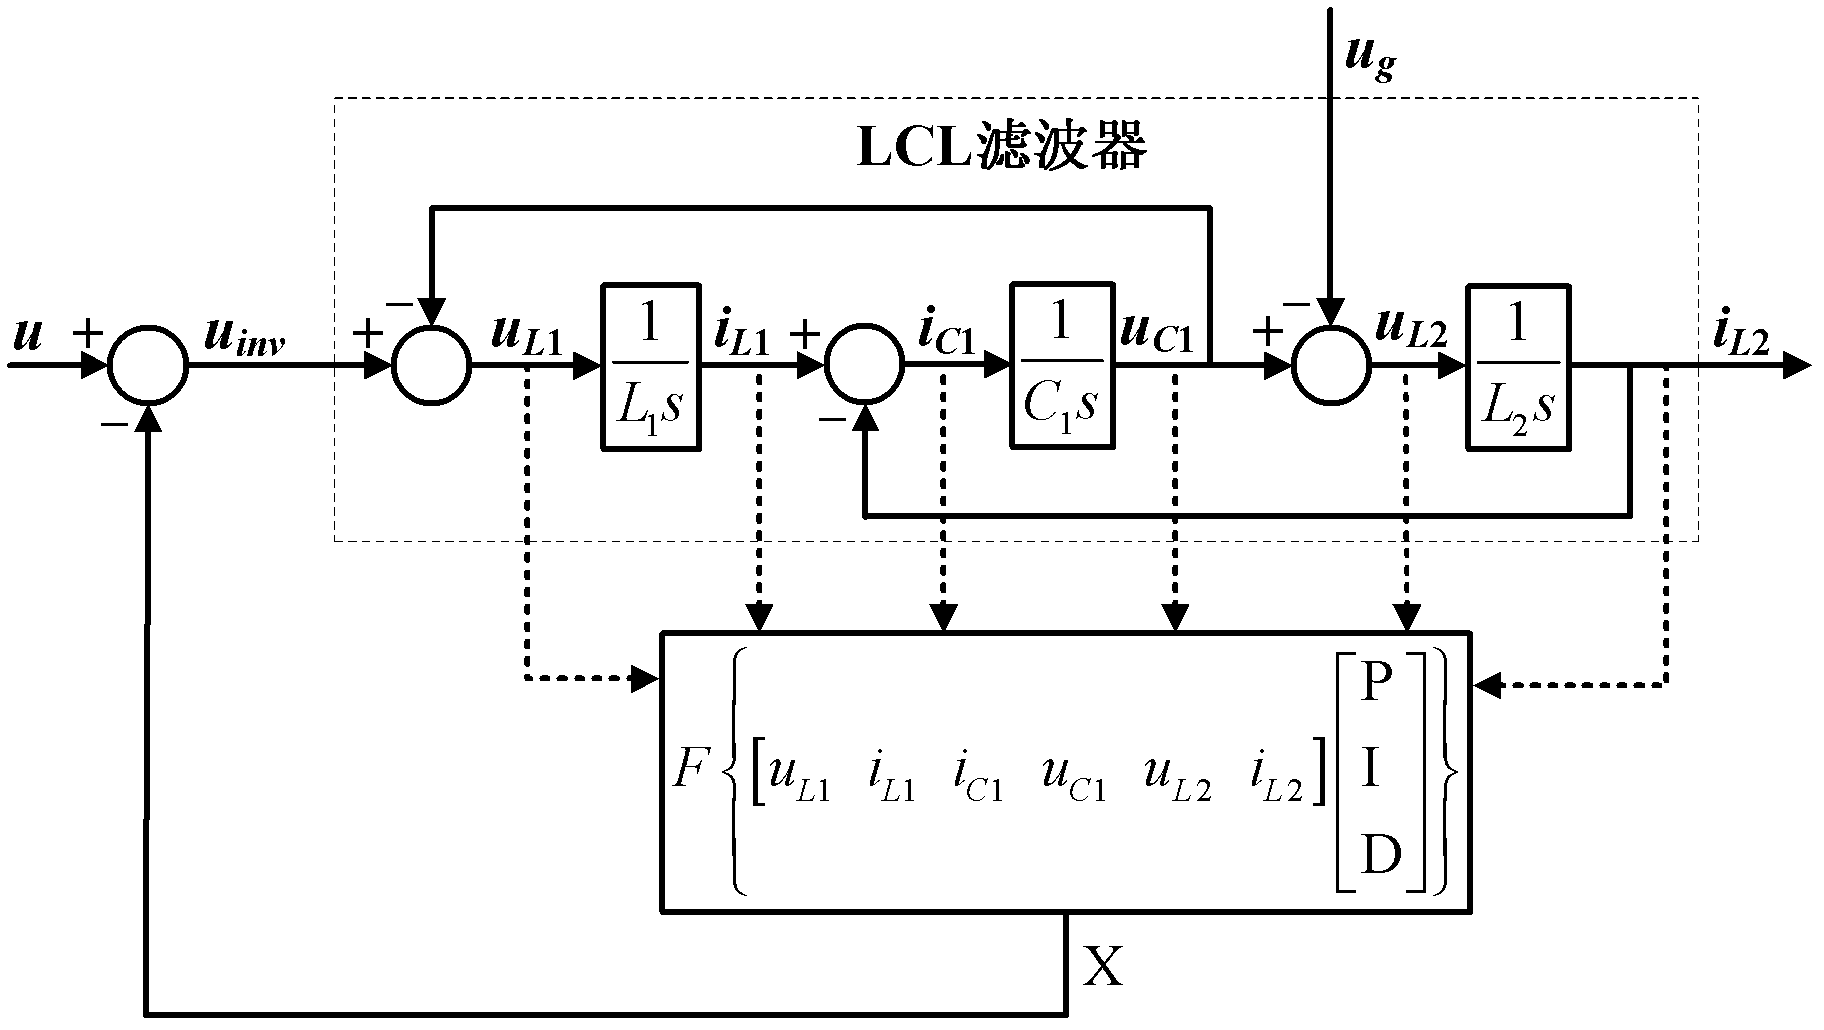 Network access current control method for single-phase less container load (LCL) filtering grid-connected inverter